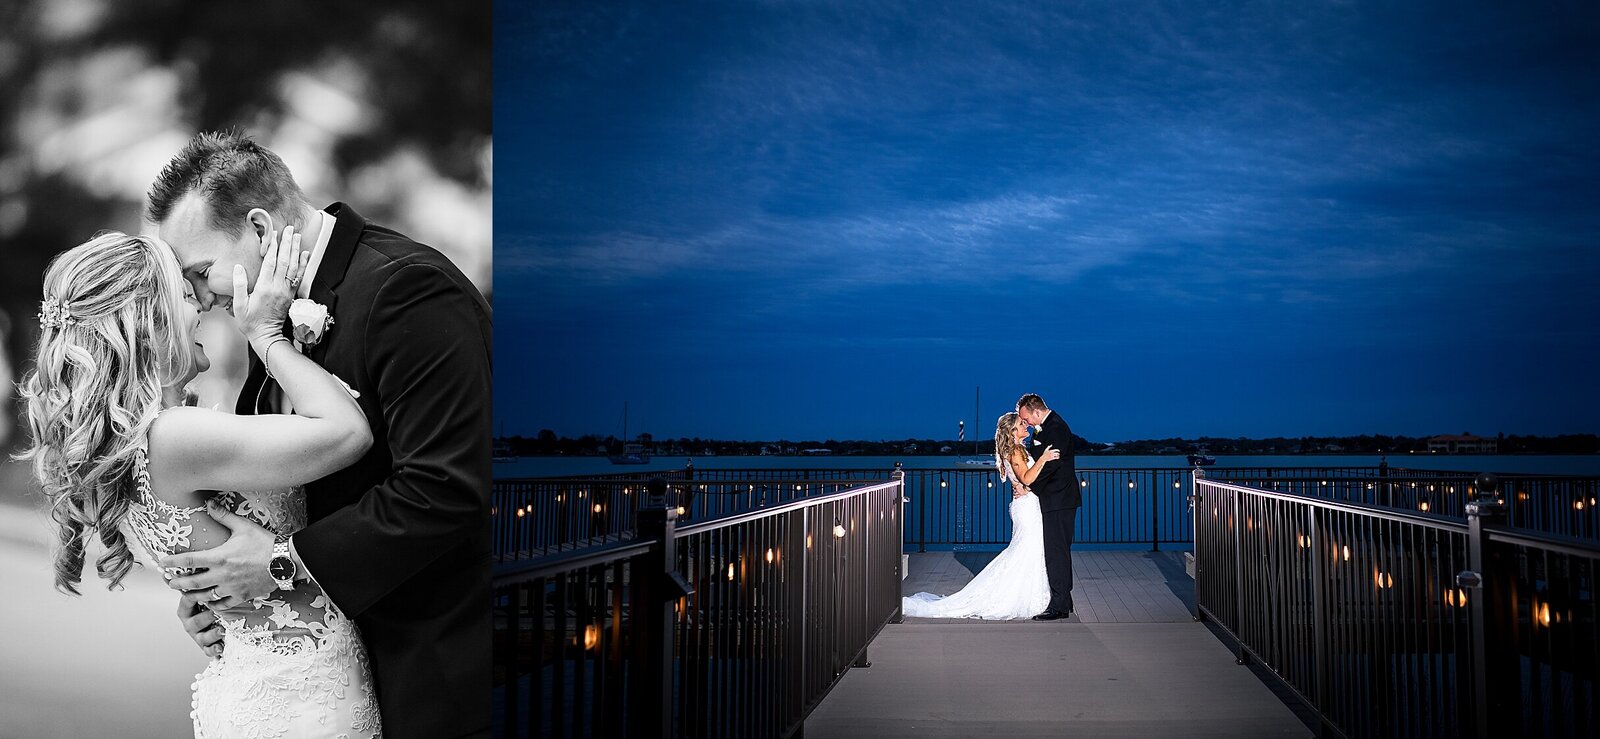 Wedding Photographer | The Riverhouse St. Augustine | Chynna Pacheco Photography-12